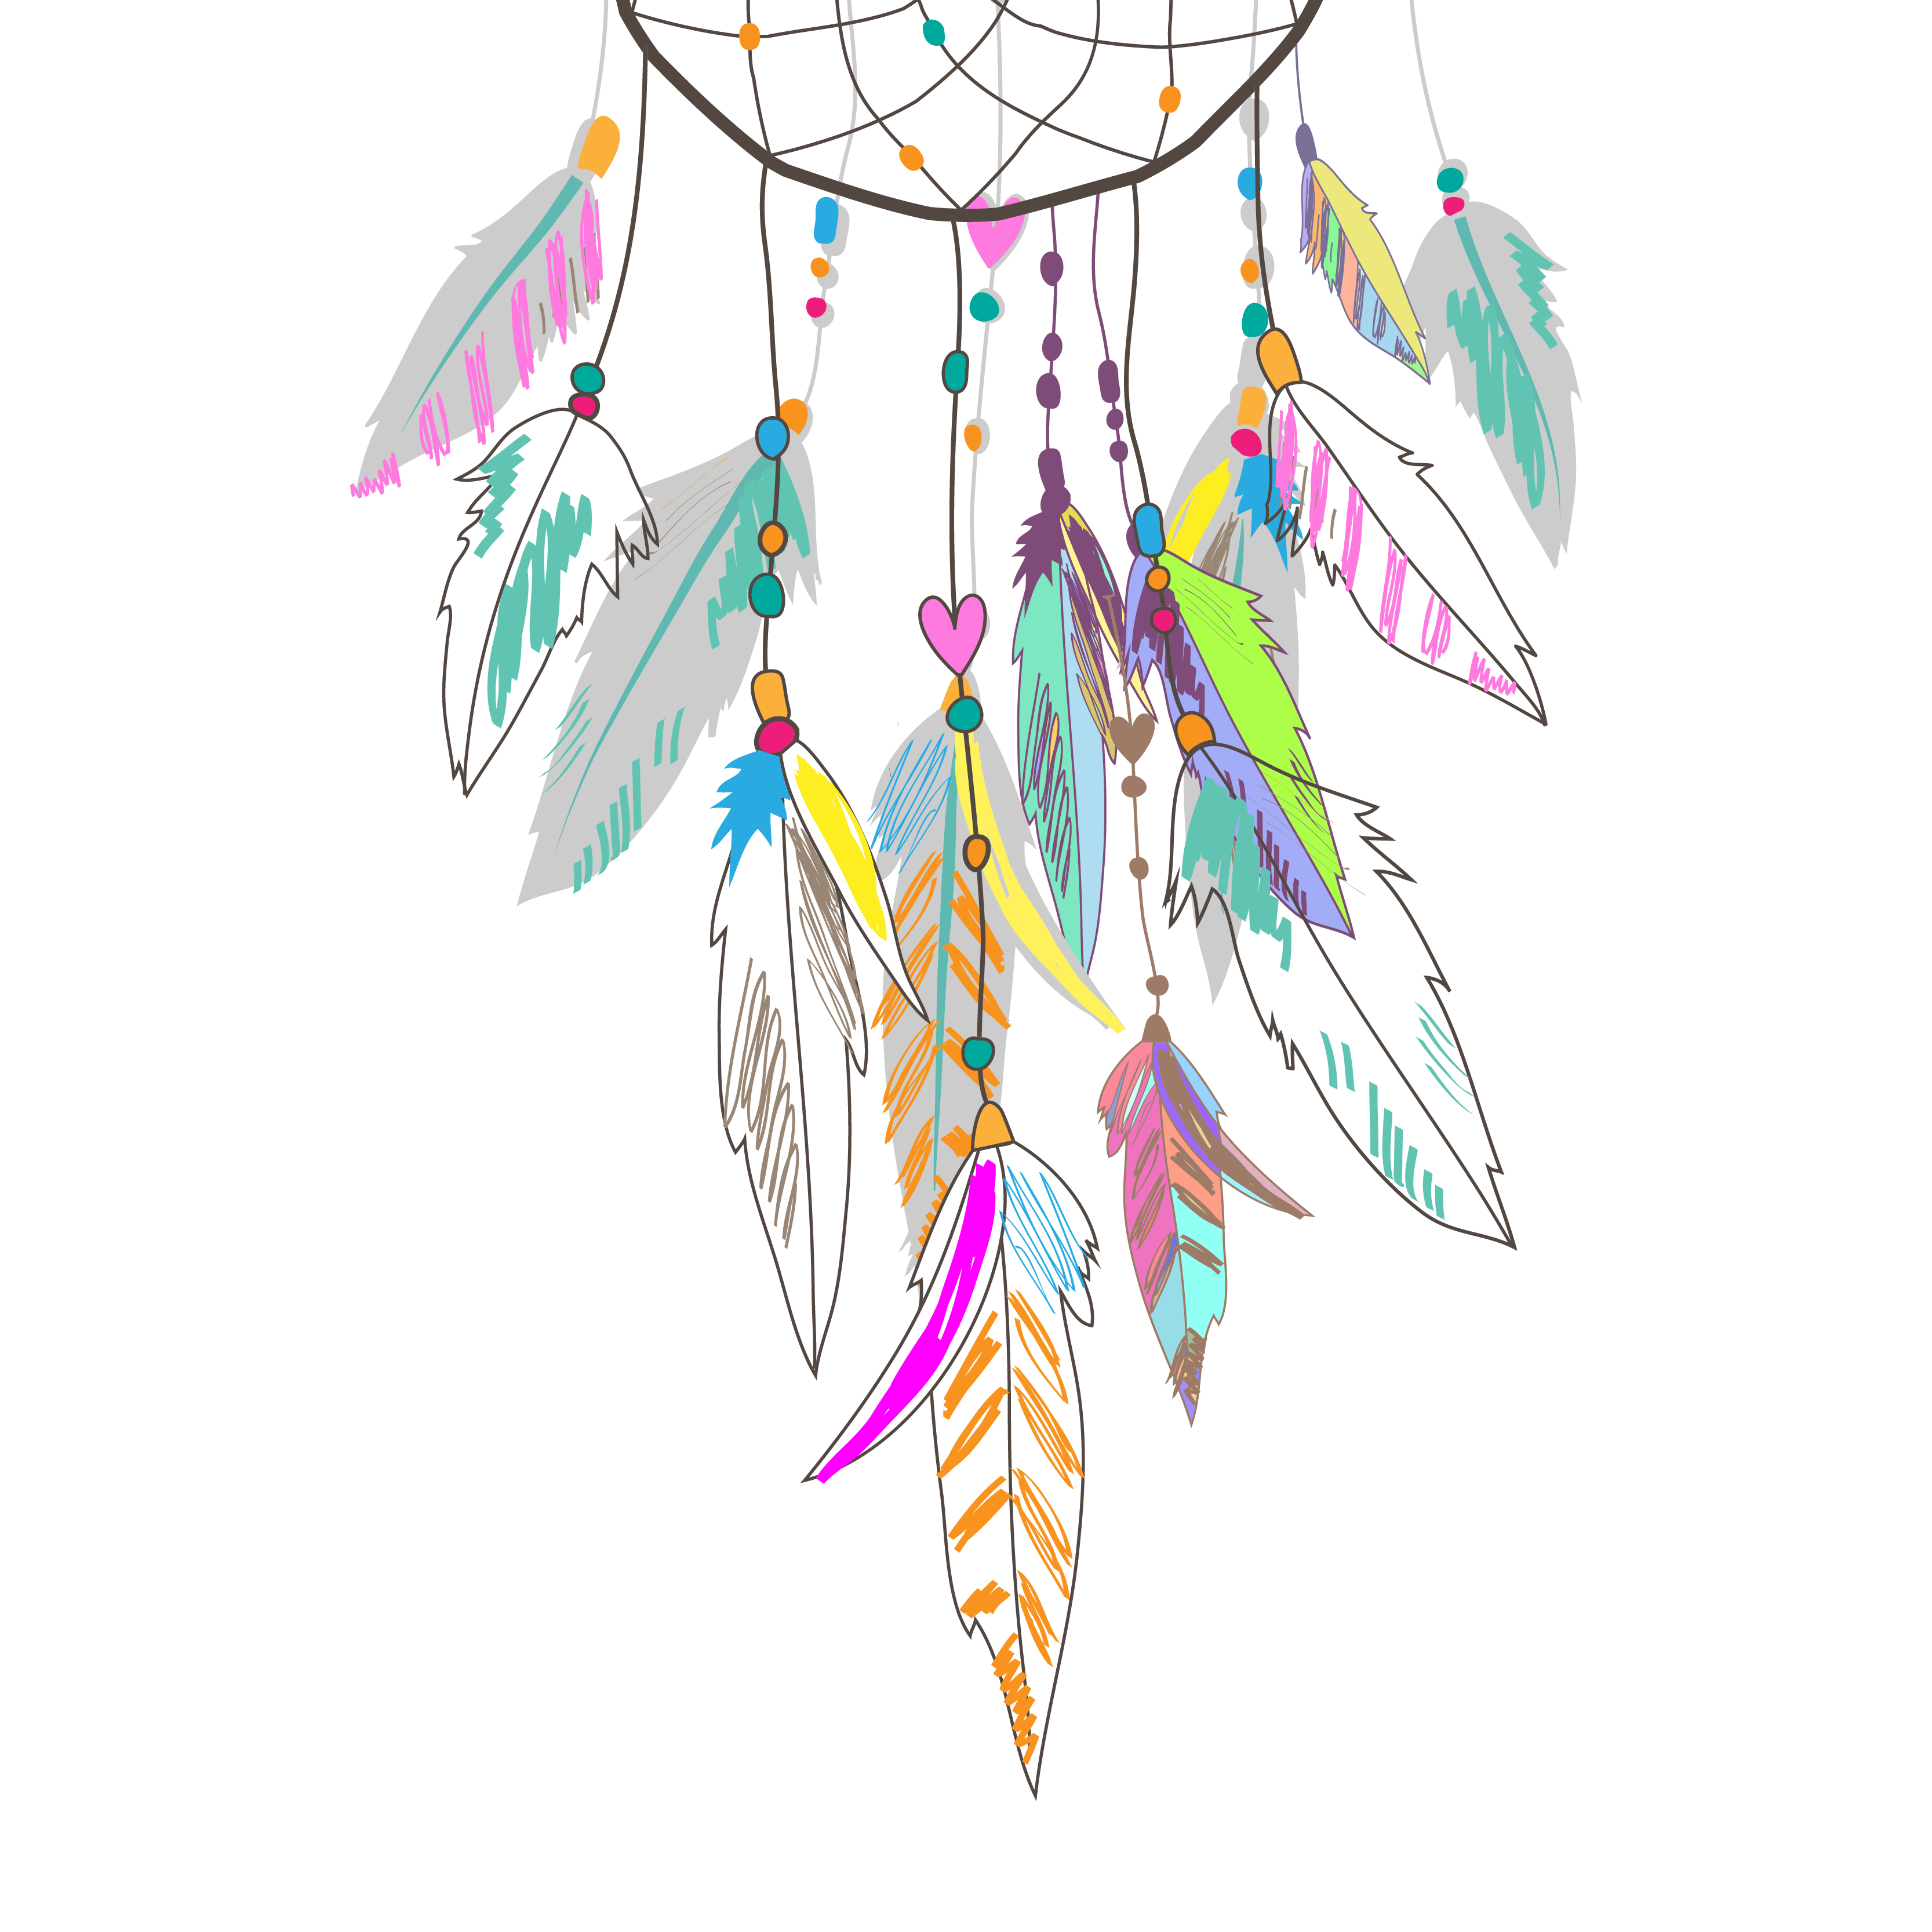 colorful dream catcher drawings
